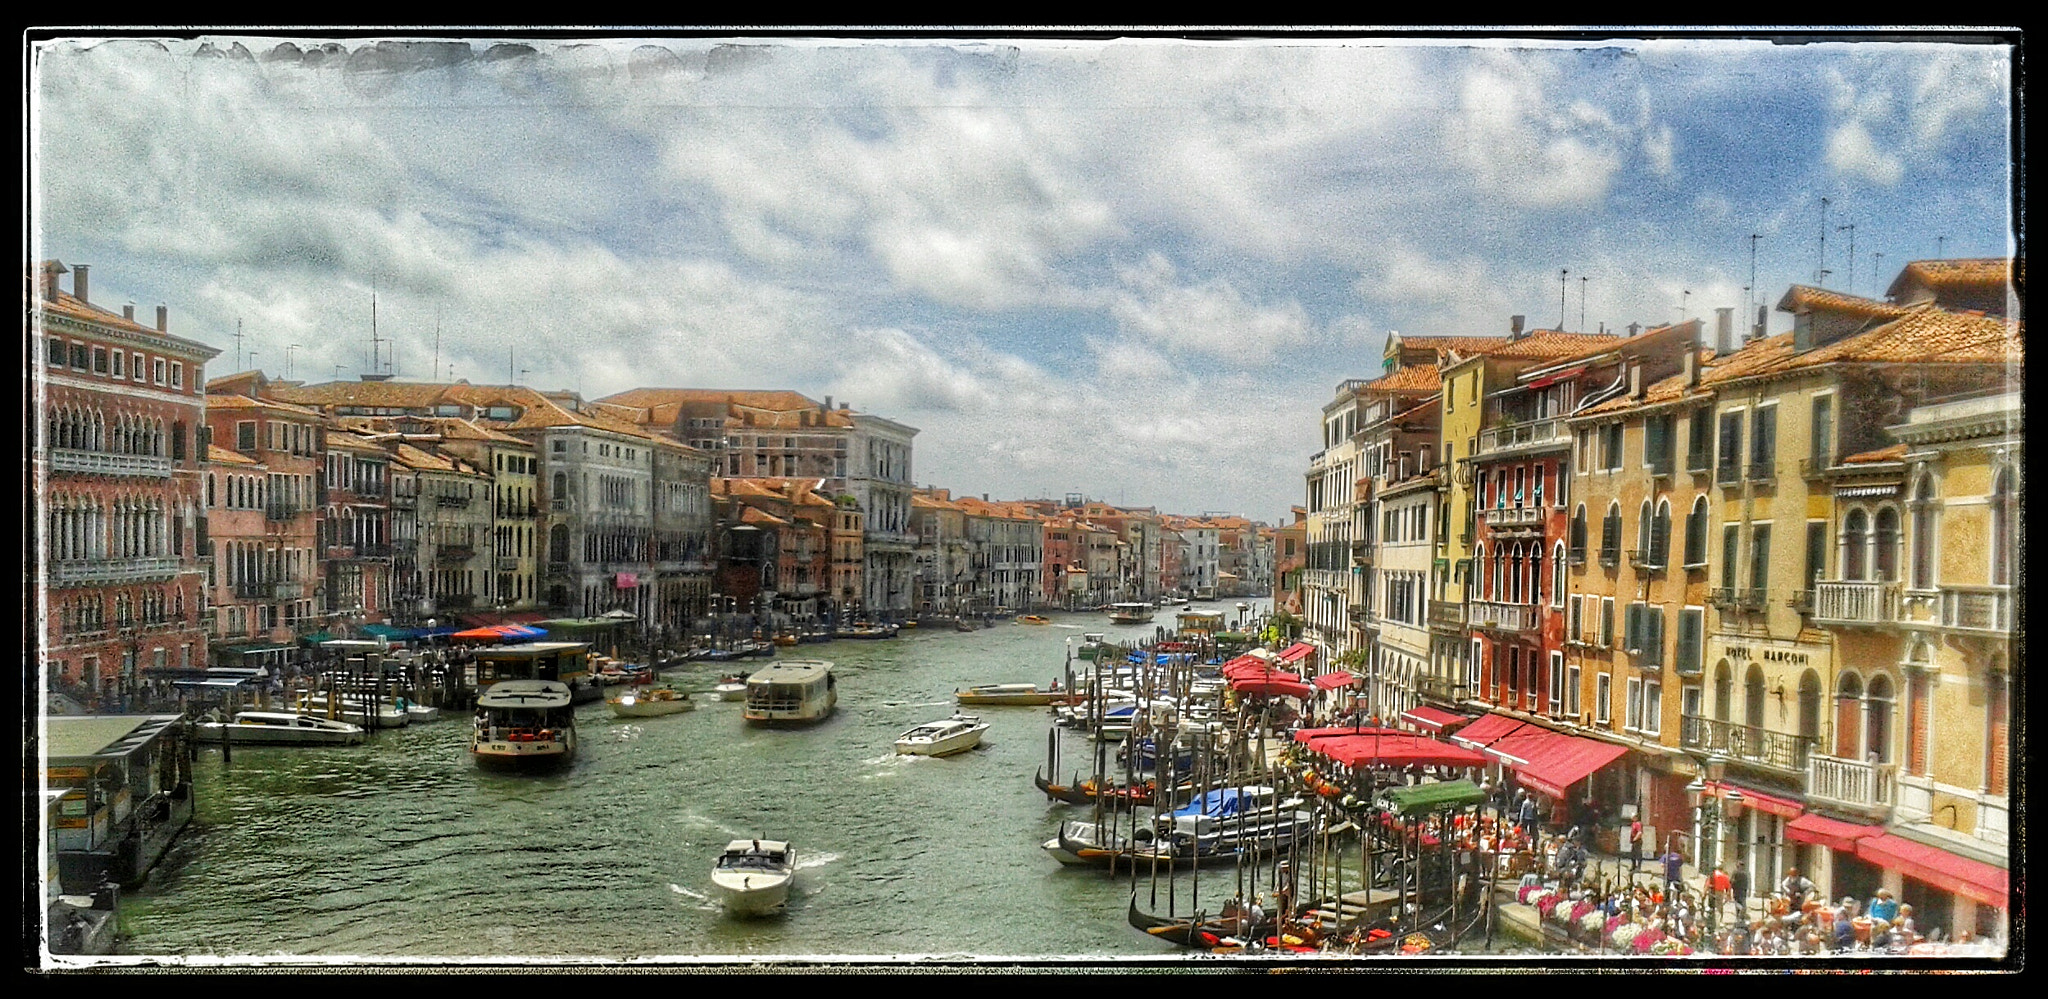 Samsung Galaxy Trend Plus sample photo. Venice by canaletto photography